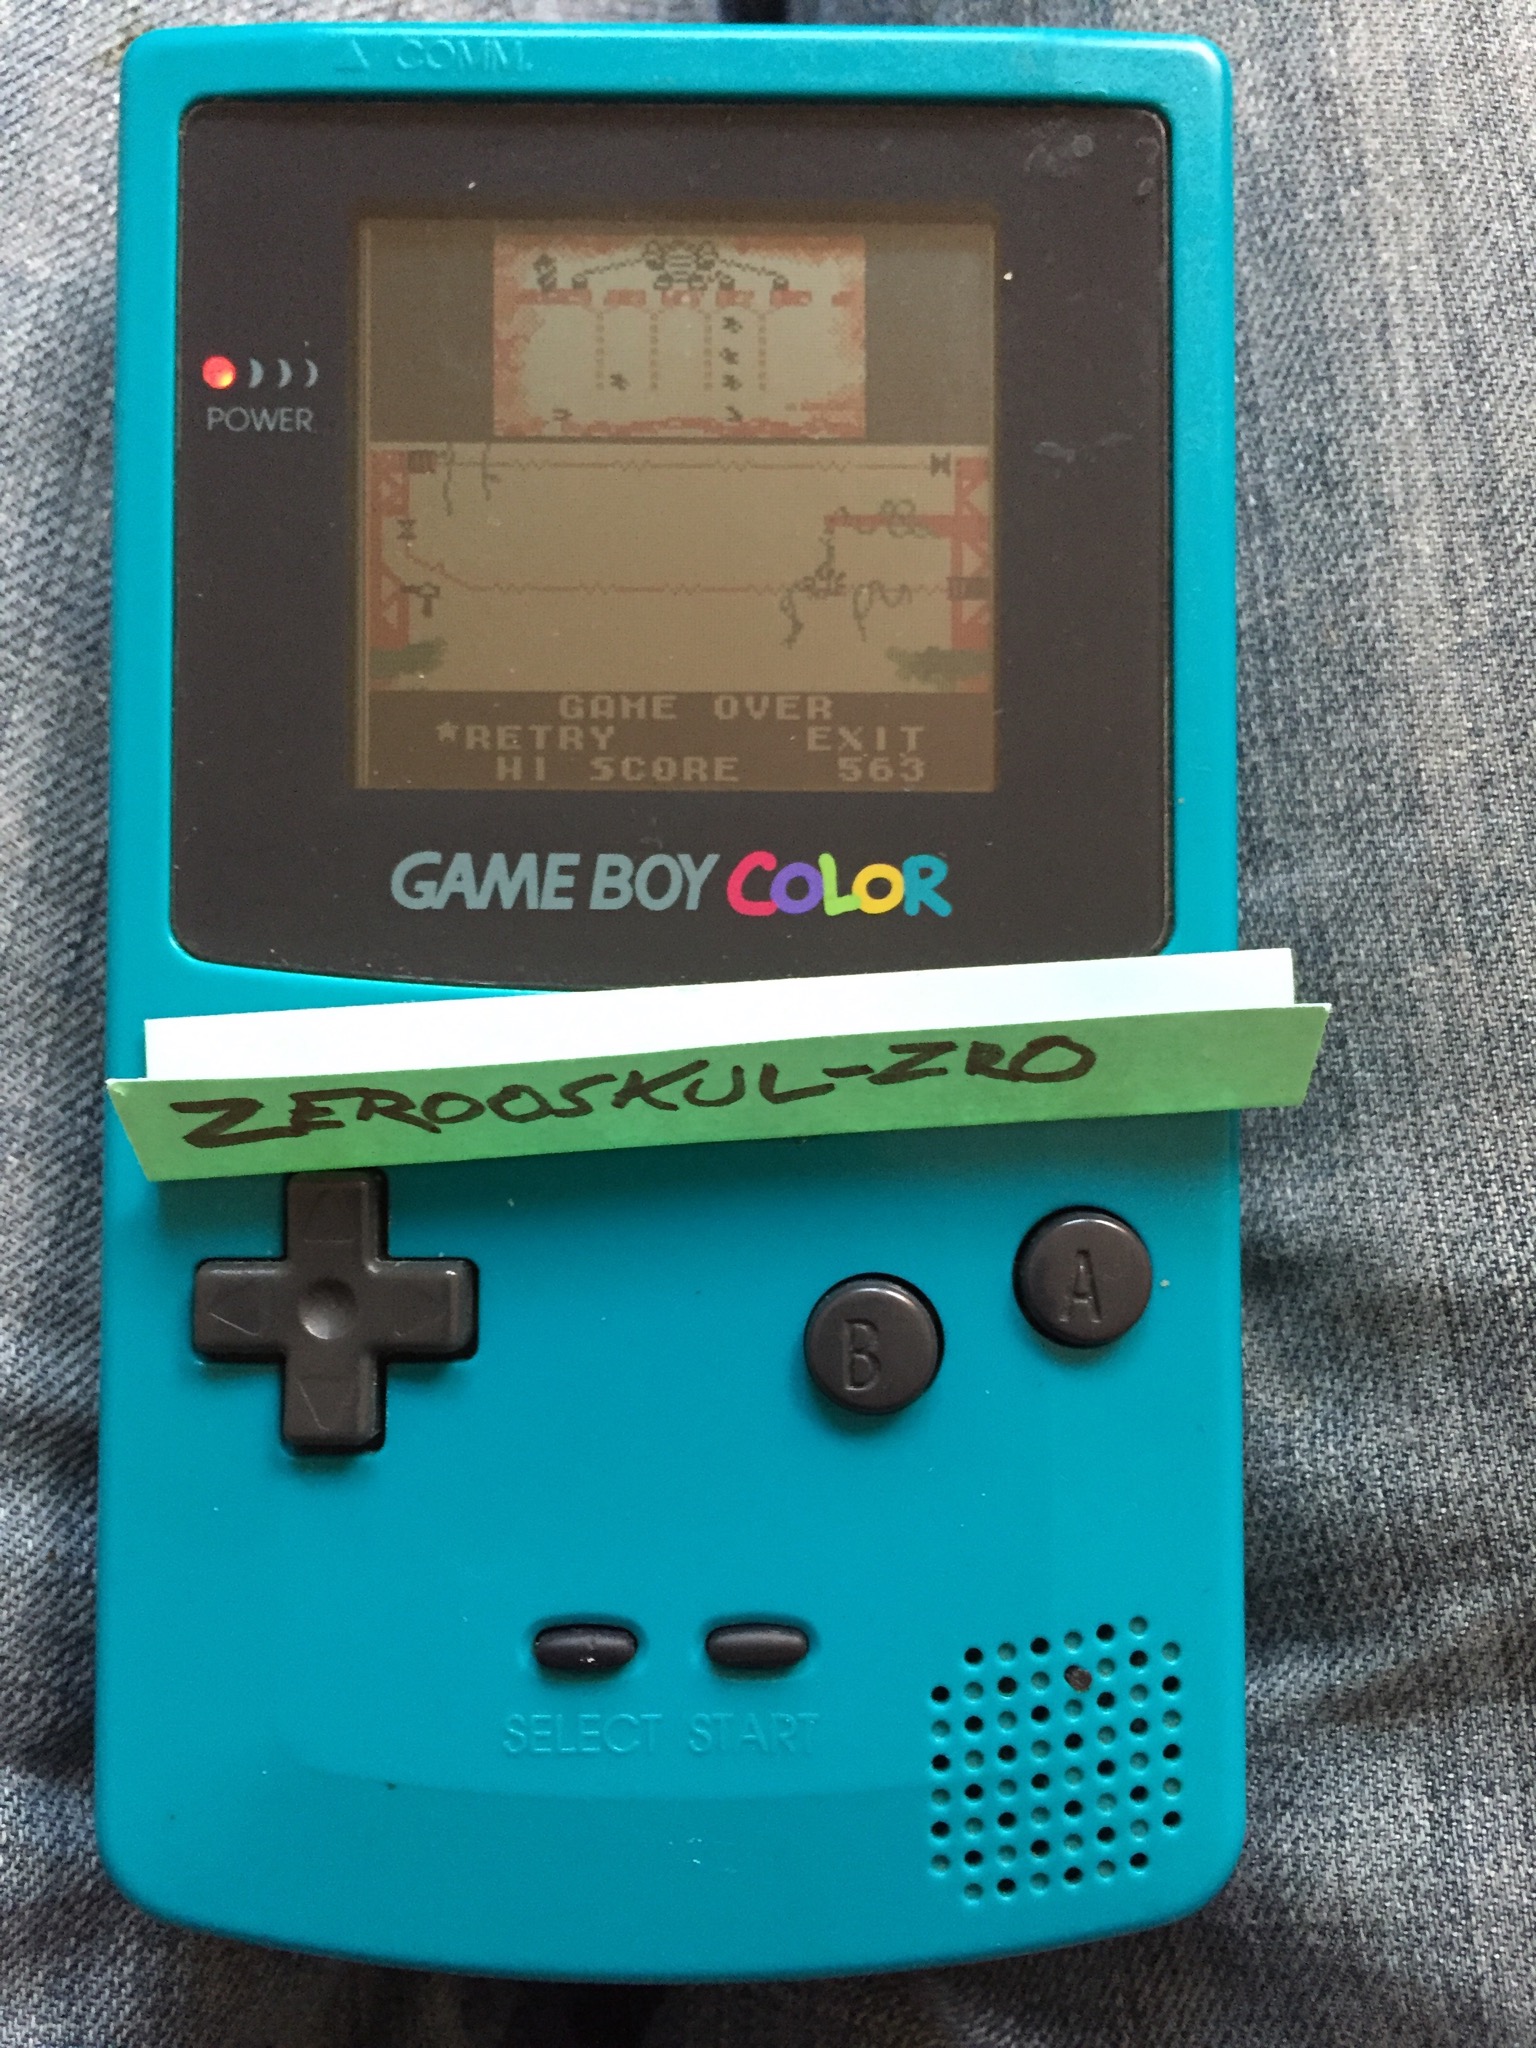 zerooskul: Game & Watch Gallery 2: Donkey Kong II [Classic: Hard] (Game Boy Color) 563 points on 2018-07-01 15:21:14